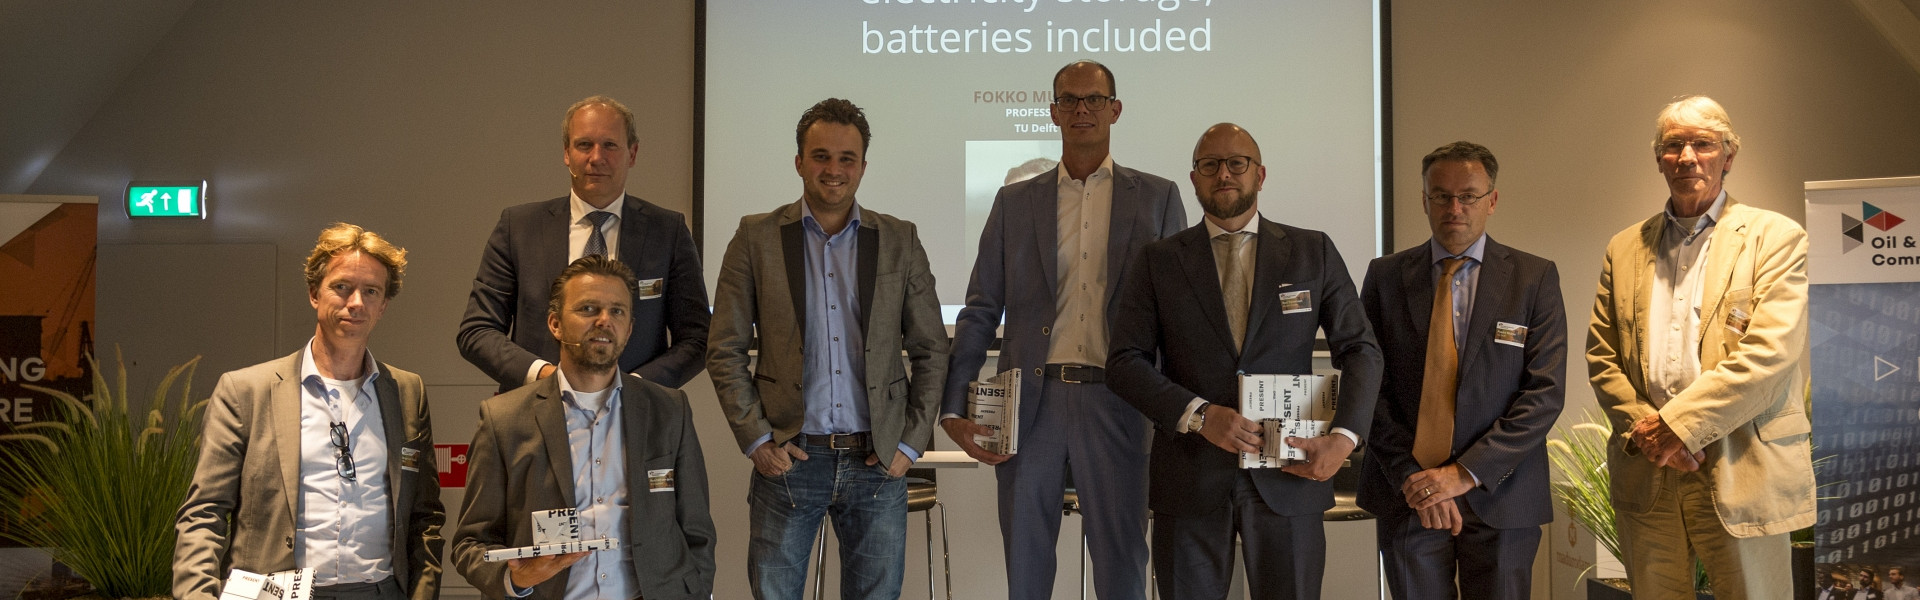 Report Oil & Gas Reinvented Community Event Energy Storage